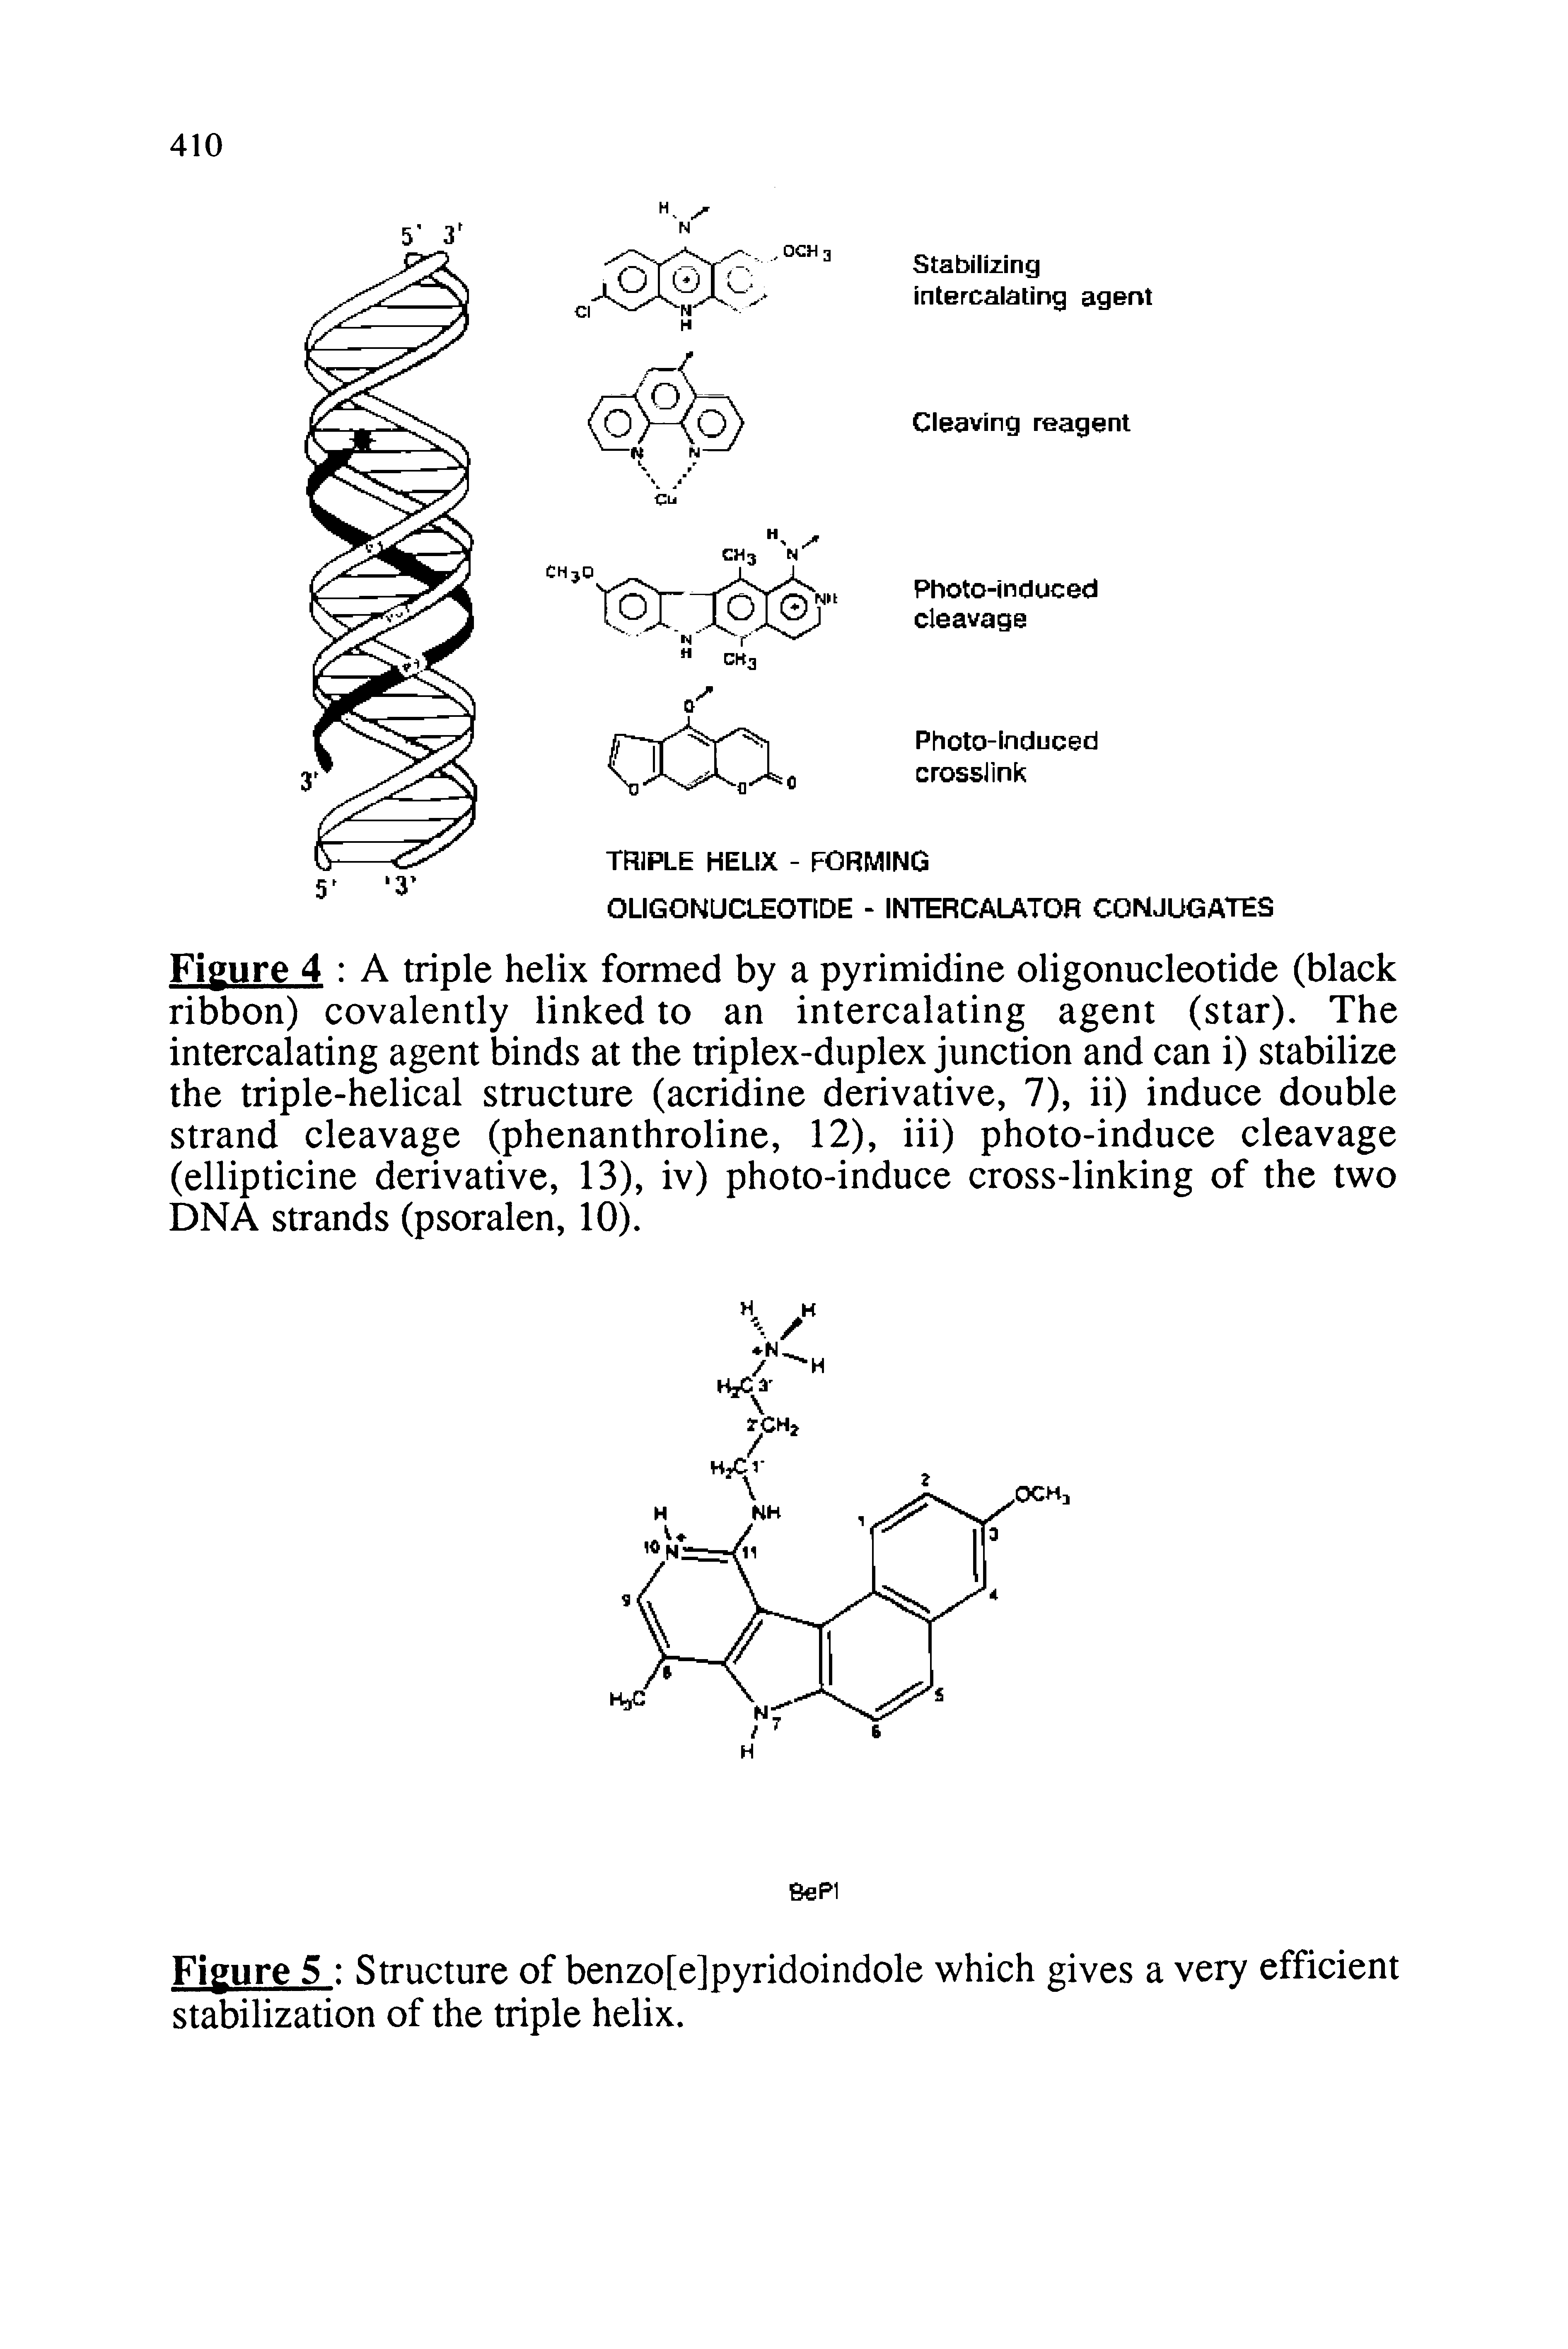 Figure 4 A triple helix formed by a pyrimidine oligonucleotide (black ribbon) covalently linked to an intercalating agent (star). The intercalating agent binds at the triplex-duplex junction and can i) stabilize the triple-helical structure (acridine derivative, 7), ii) induce double strand cleavage (phenanthroline, 12), iii) photo-induce cleavage (ellipticine derivative, 13), iv) photo-induce cross-linking of the two DNA strands (psoralen, 10).